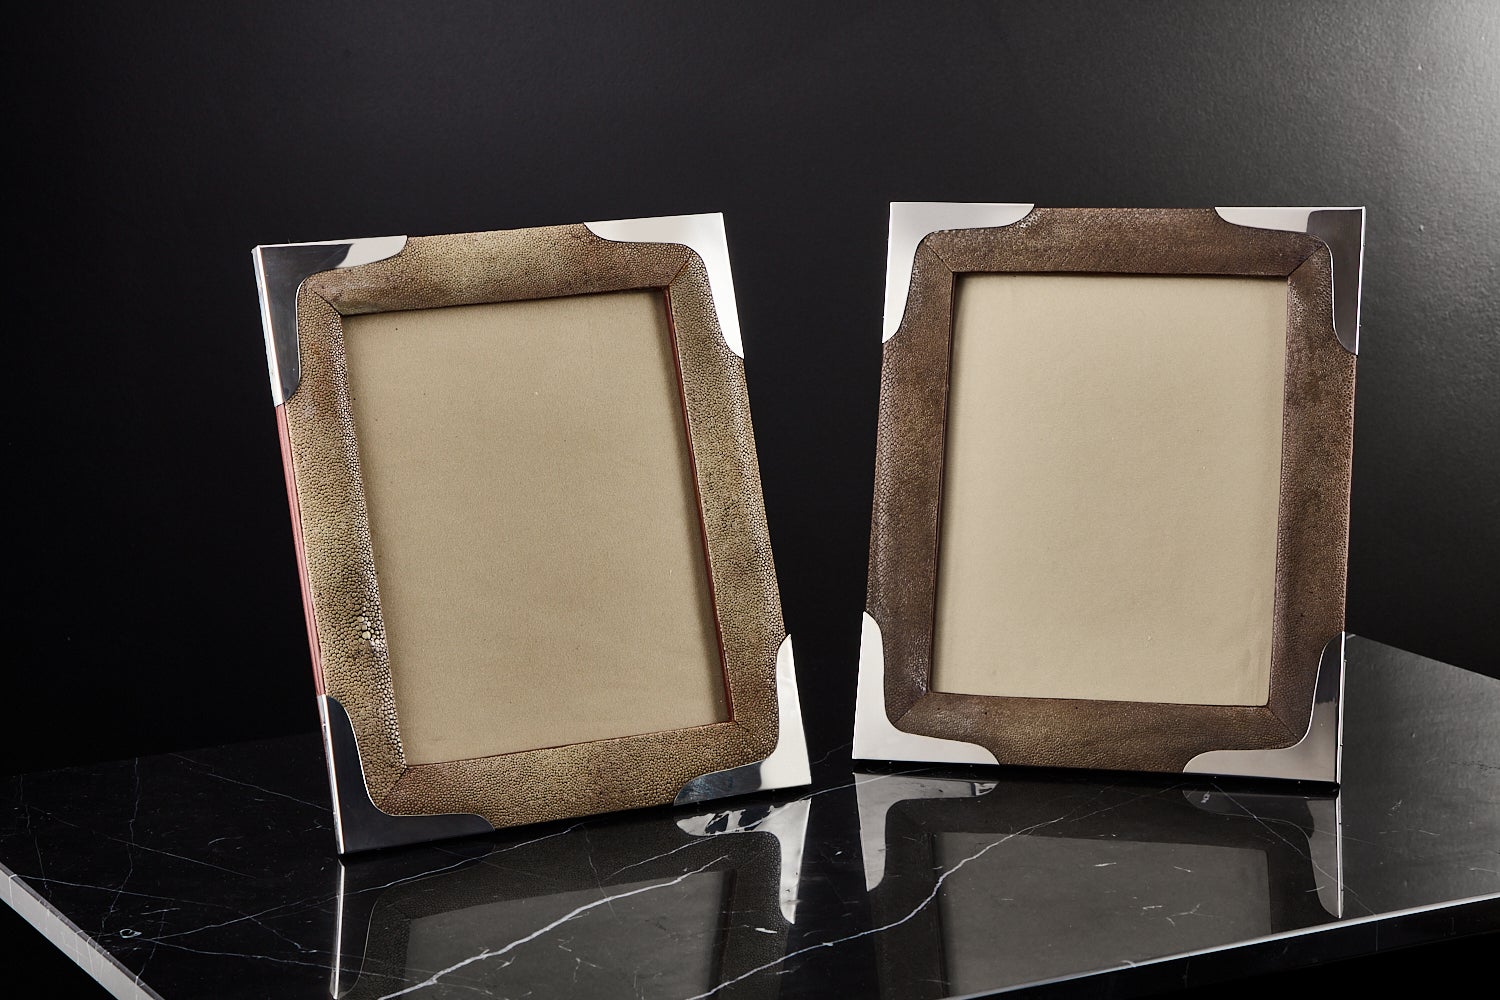 Pair of Large Mid-20th Century Shagreen Photo Frames, circa 1960 For Sale